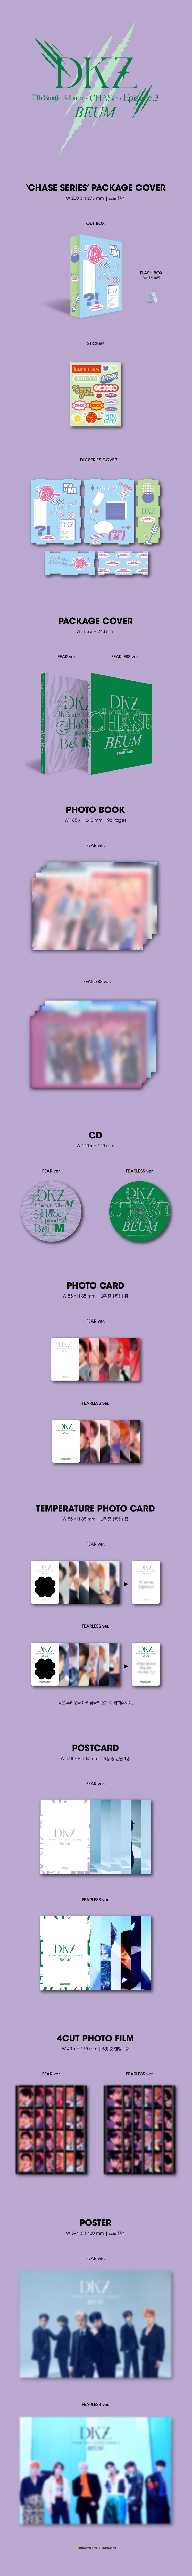 DKZ - 7TH SINGLE ALBUM CHASE EPISODE 3. BEUM CHASE SERIES PACKAGE EDITION Infographic